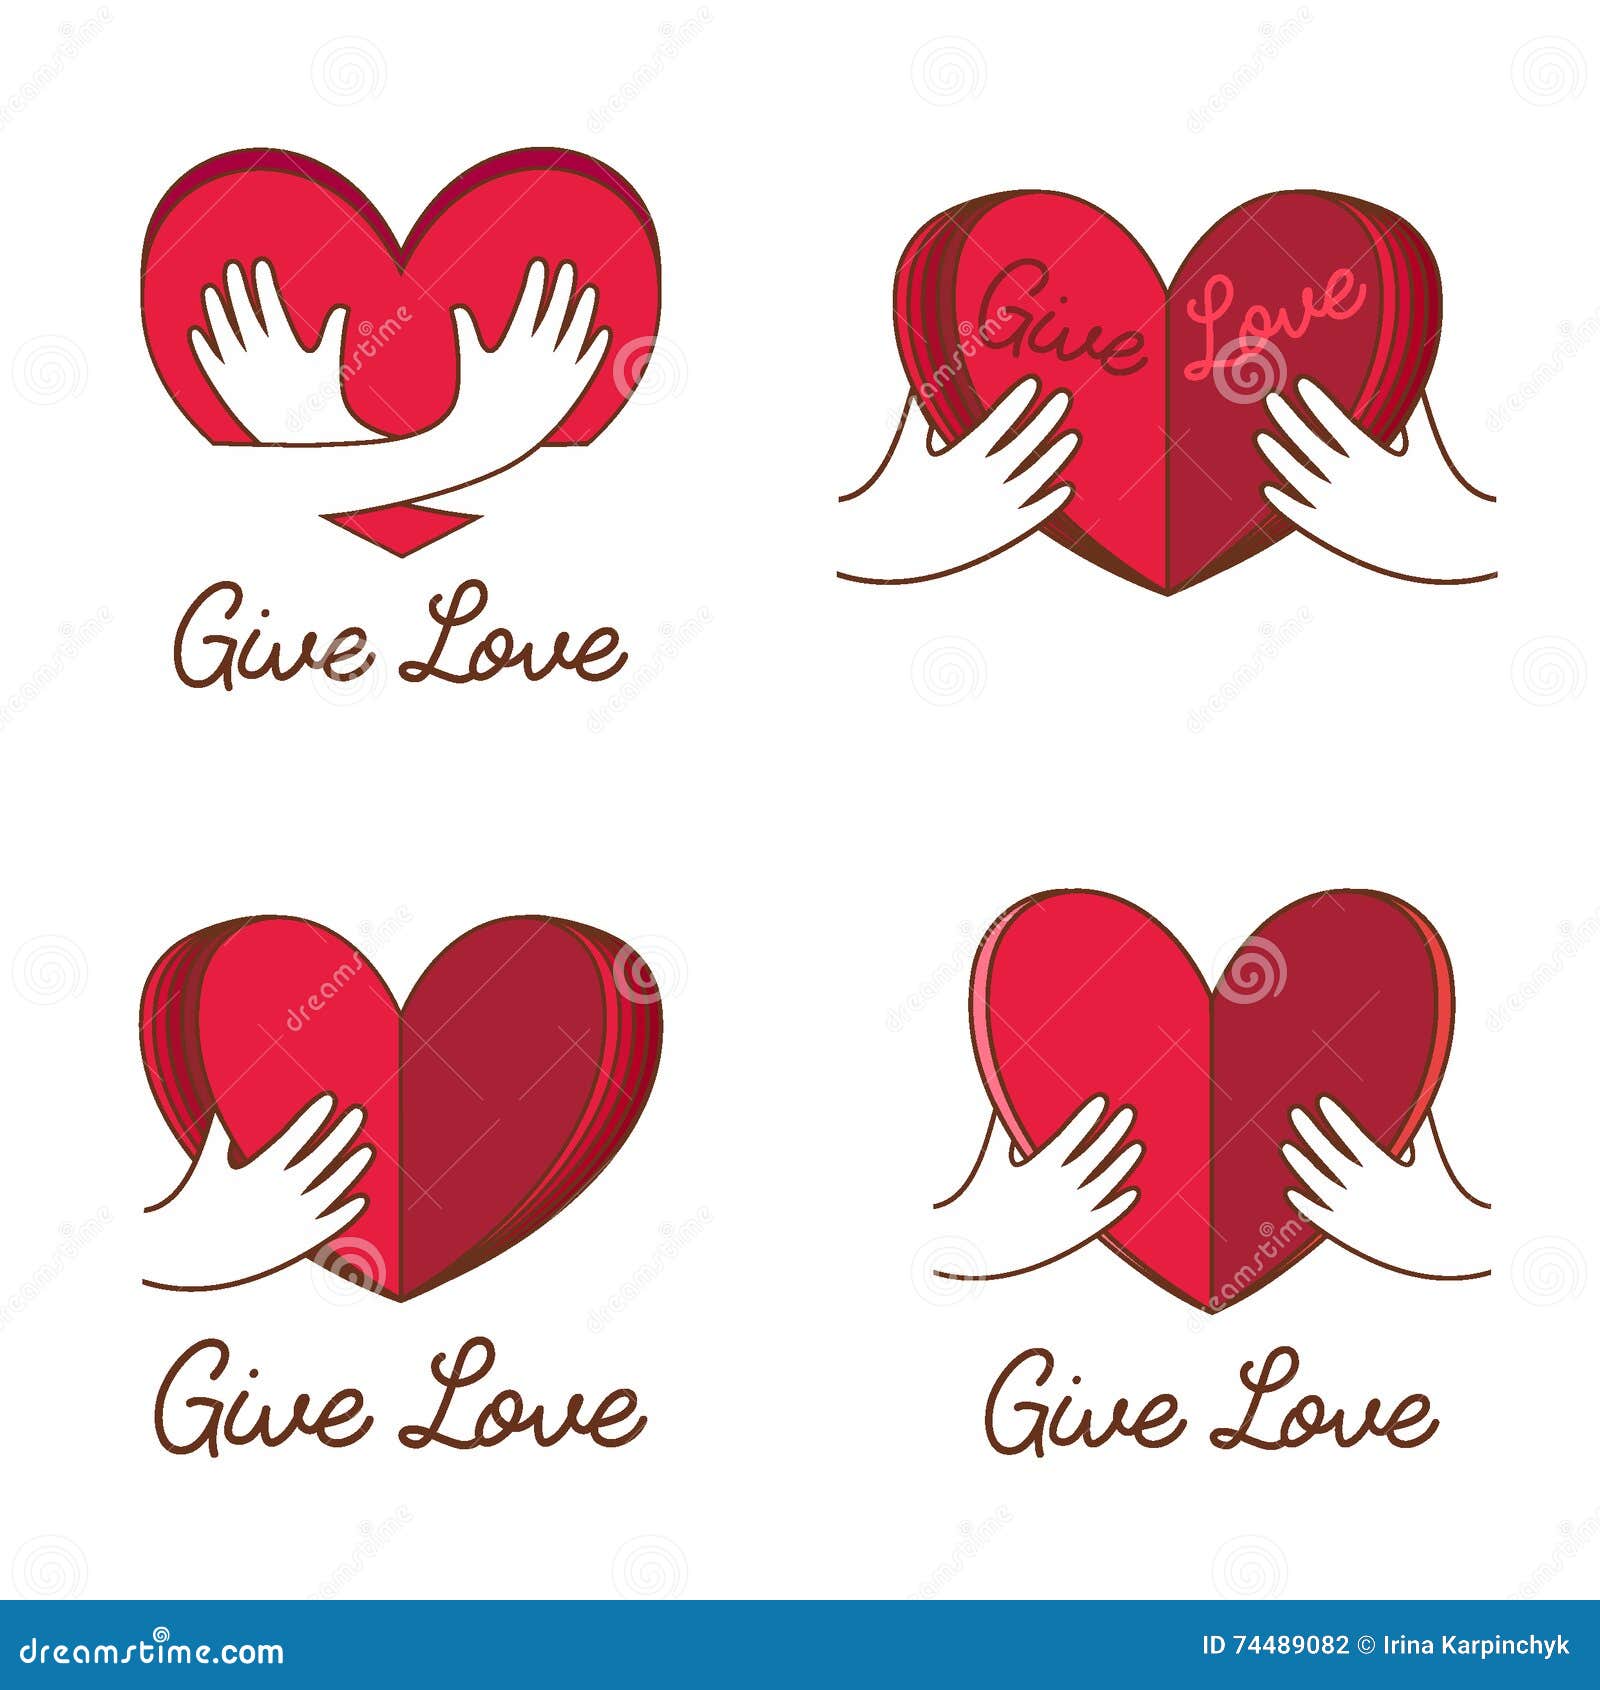 Vector Set Of Logos For Charity The Work Of Volunteers Give Love